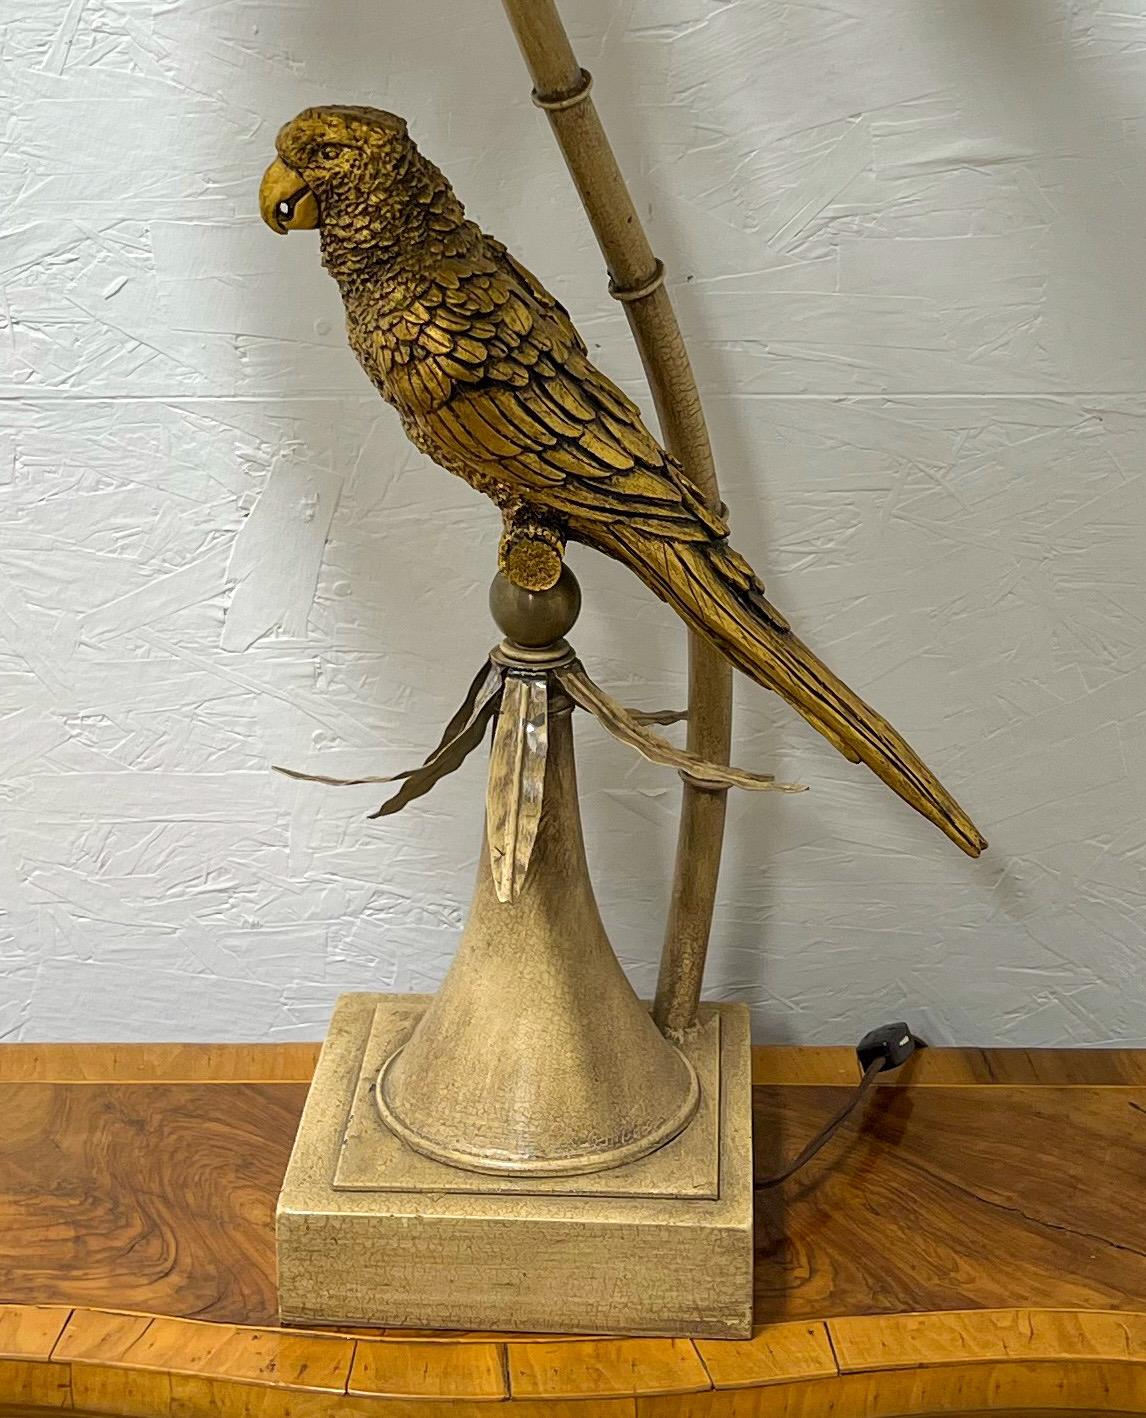 This is a pair of Palmbeach Regency style tole parrot lamps. The body of the bird is composition, and the bases and palm fronds are metal. The shade is 18”D and 8” in height. The base is 7.5” square. They are in very good condition and have vintage